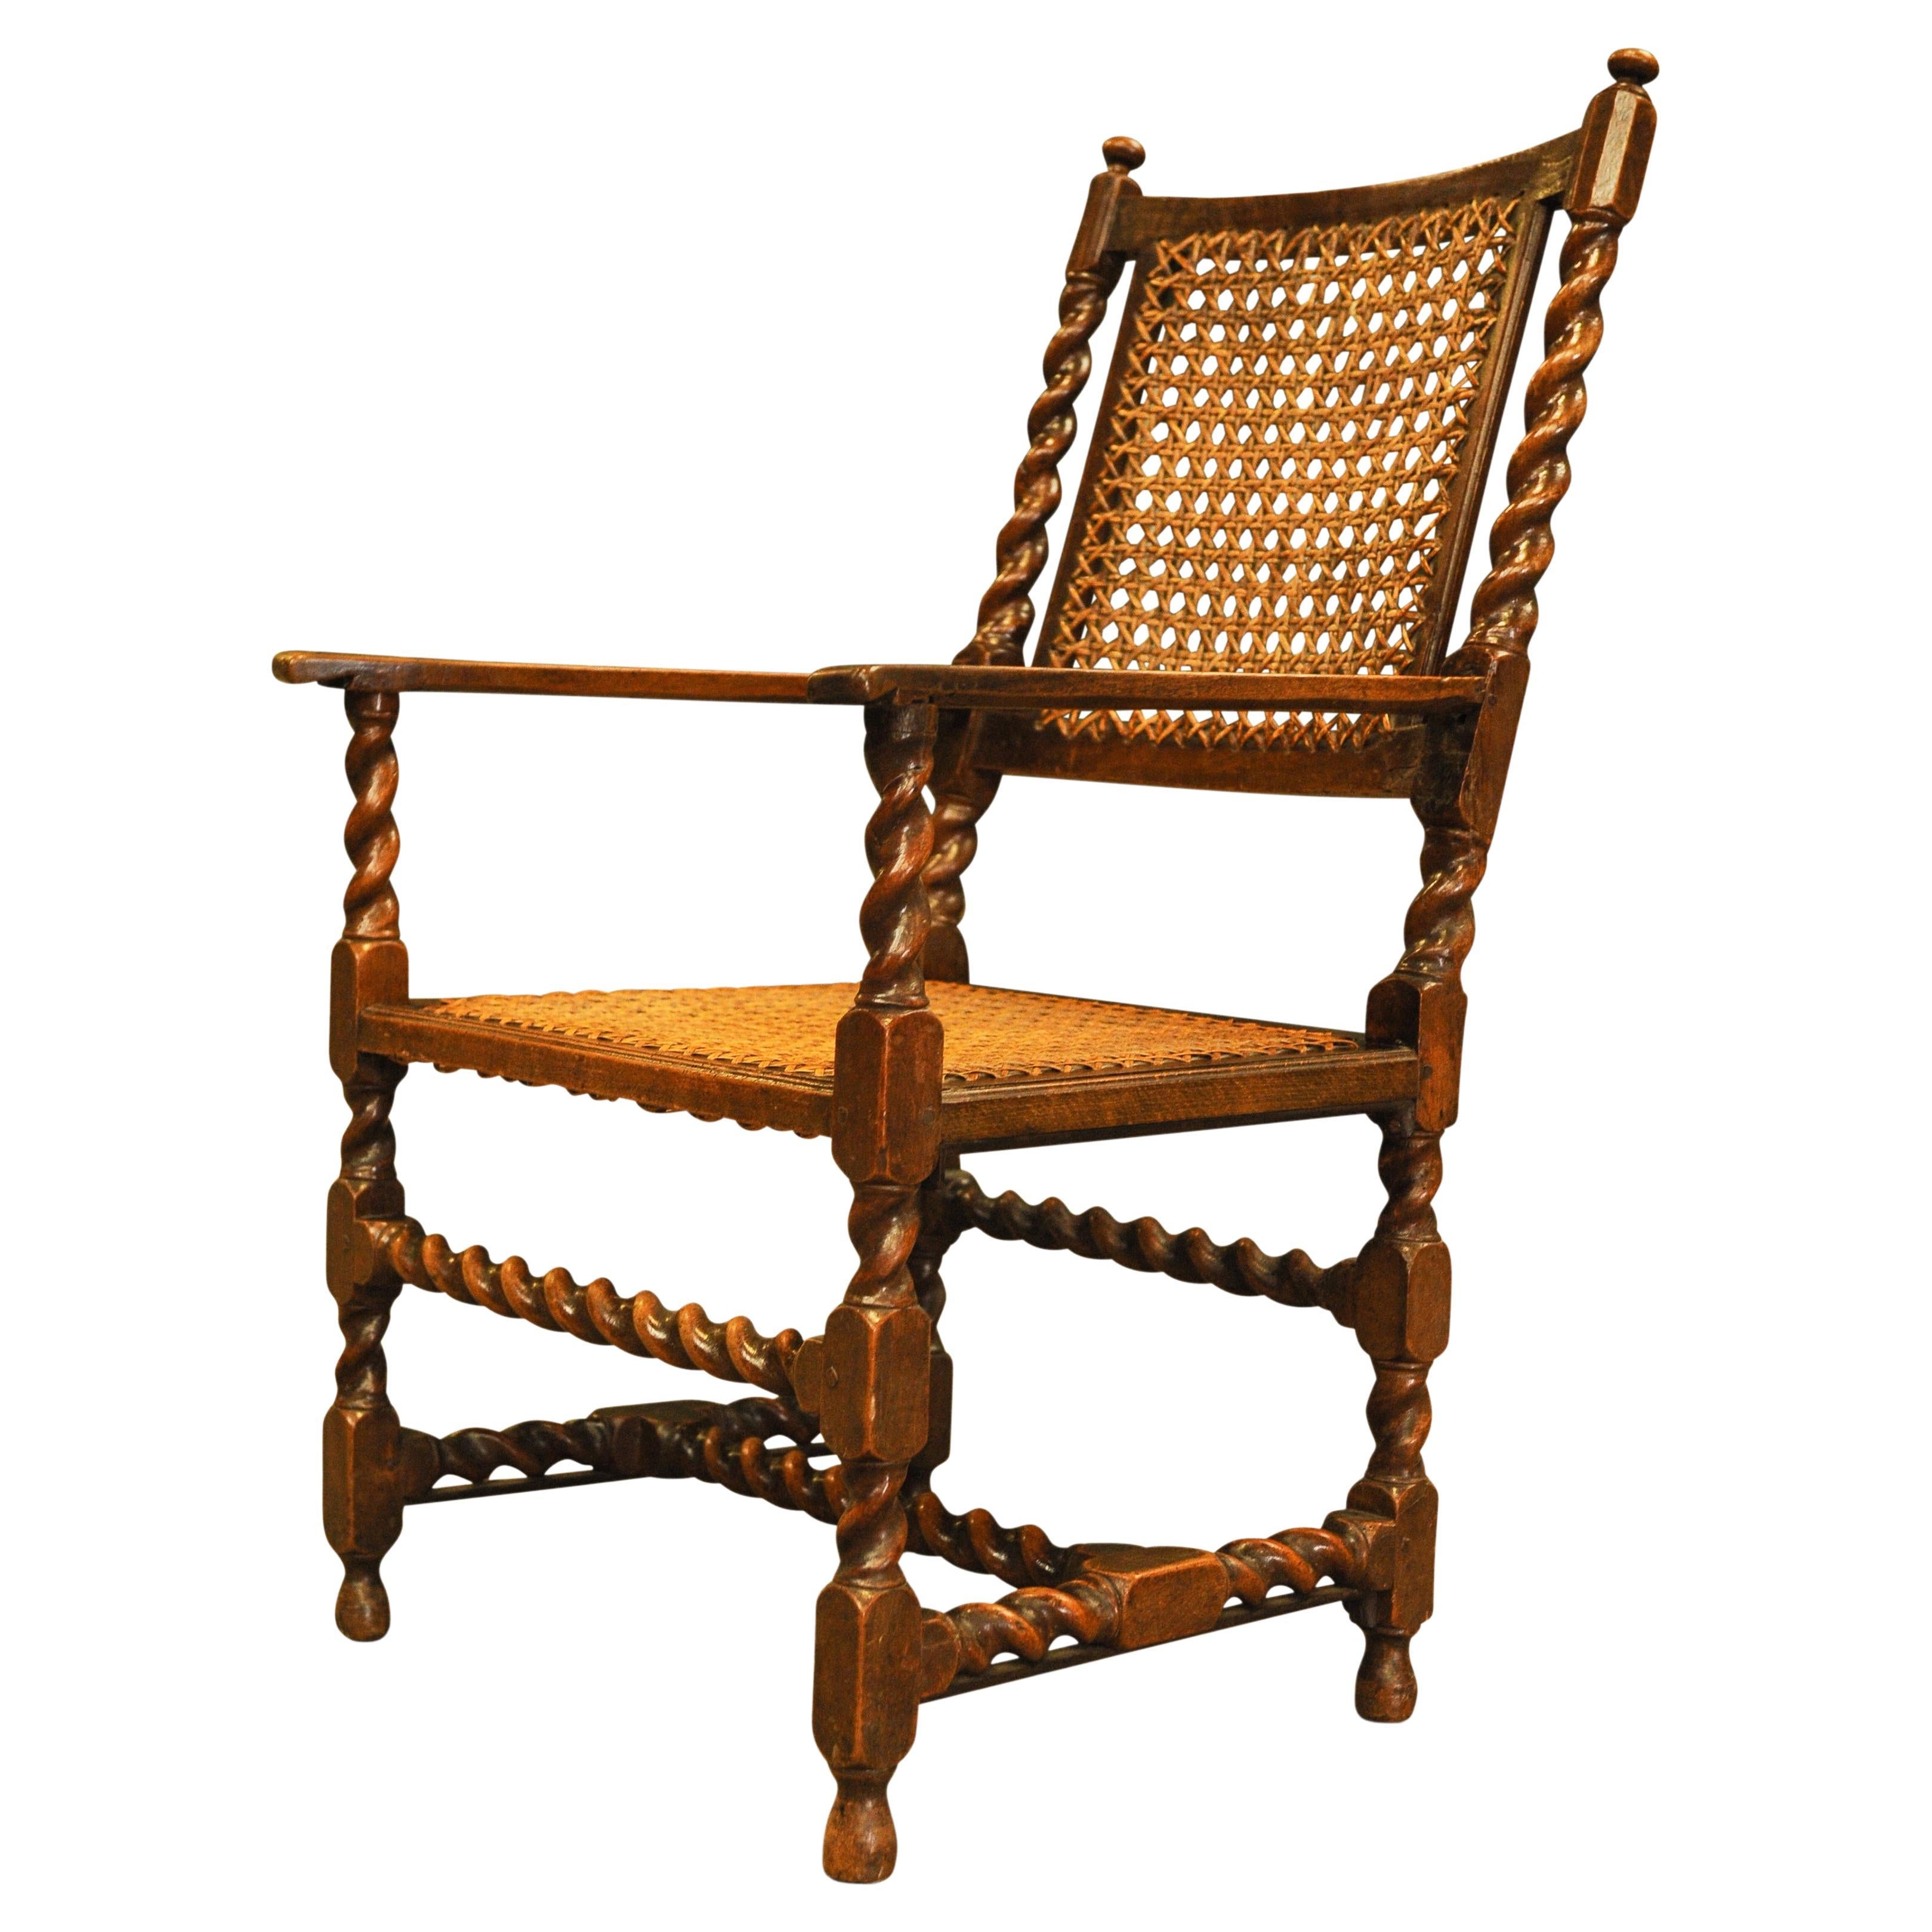 Antique Walnut Barley Twist Library Armchair with Cane Seat & Rear

Extra dimensions 
Seat width: 52cm I Seat depth: 47cm